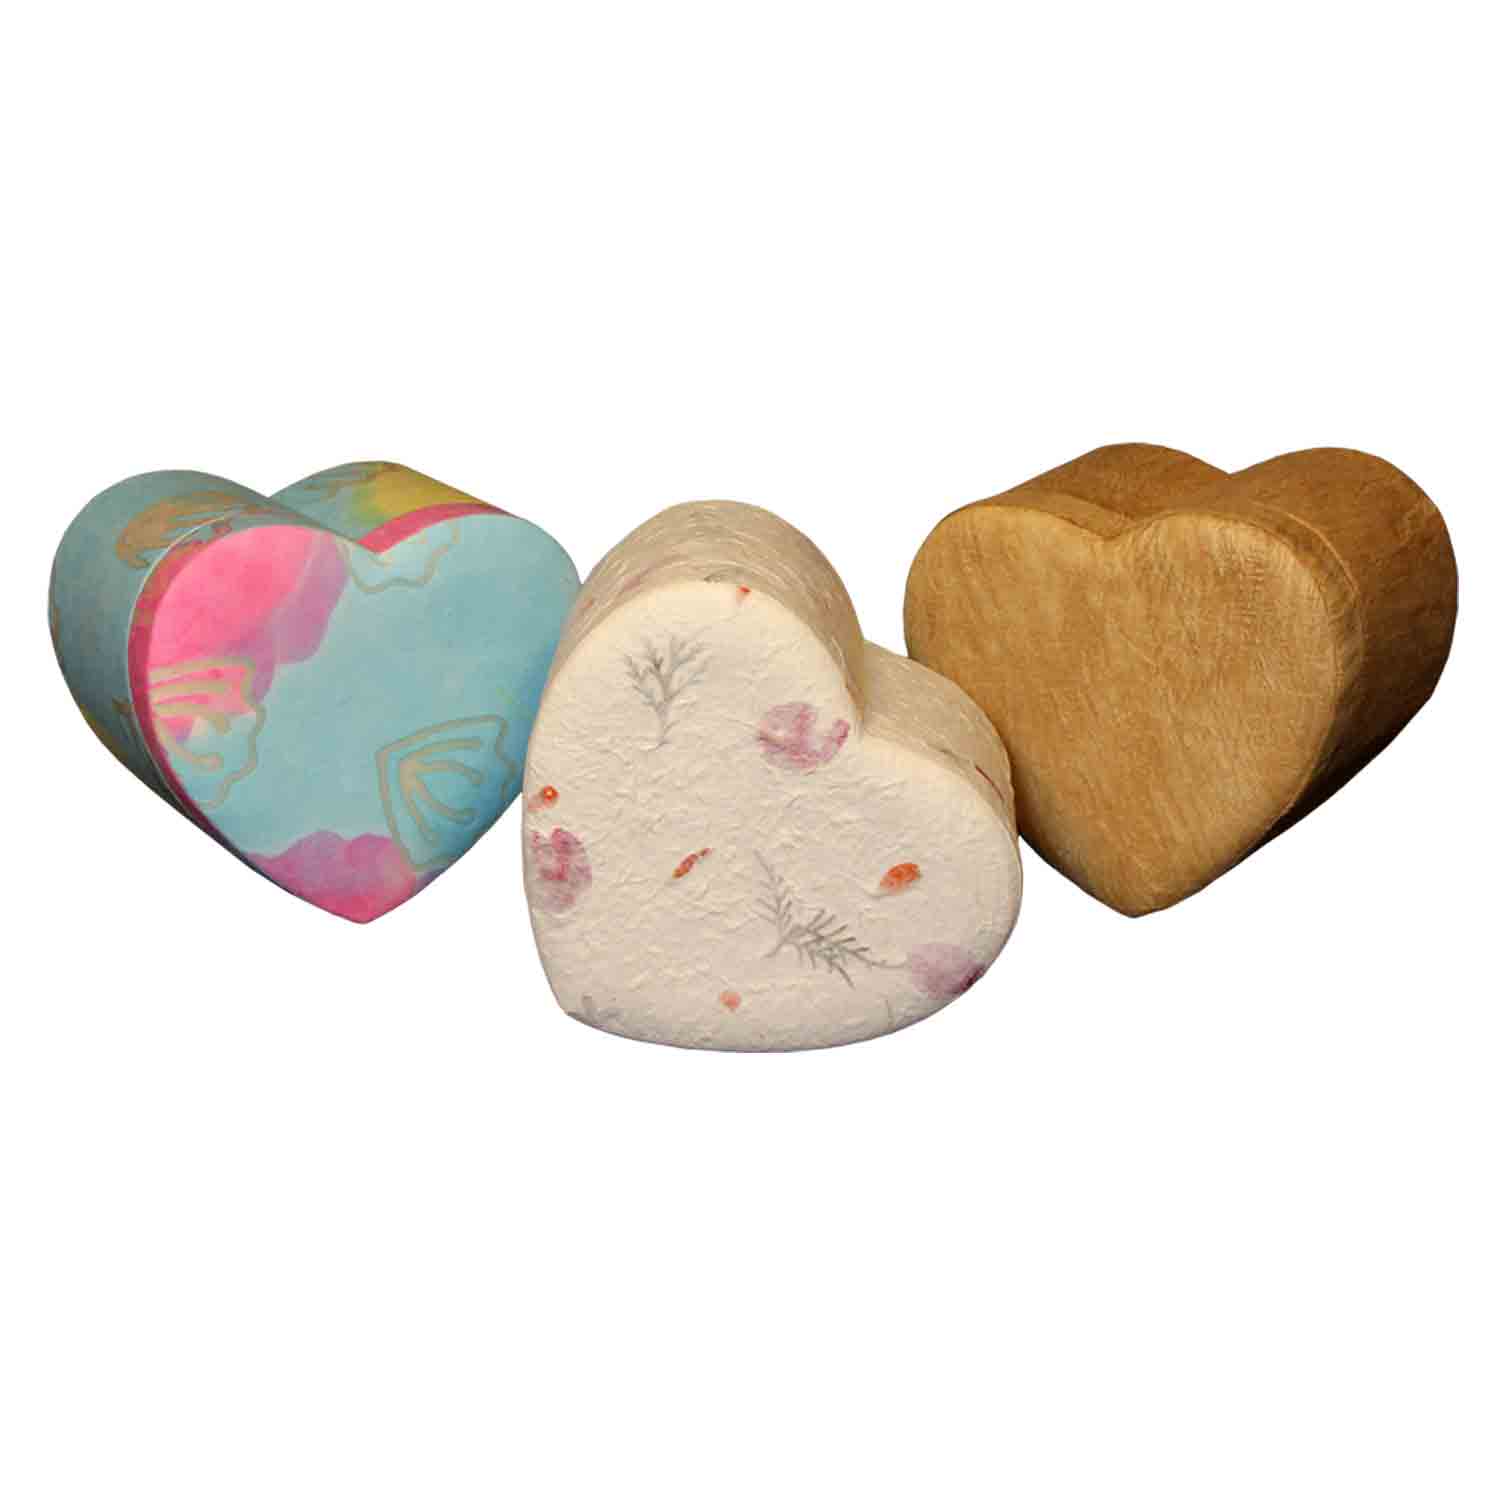 Heart Shaped Biodegradable Urn for Ashes Medium Three Designs